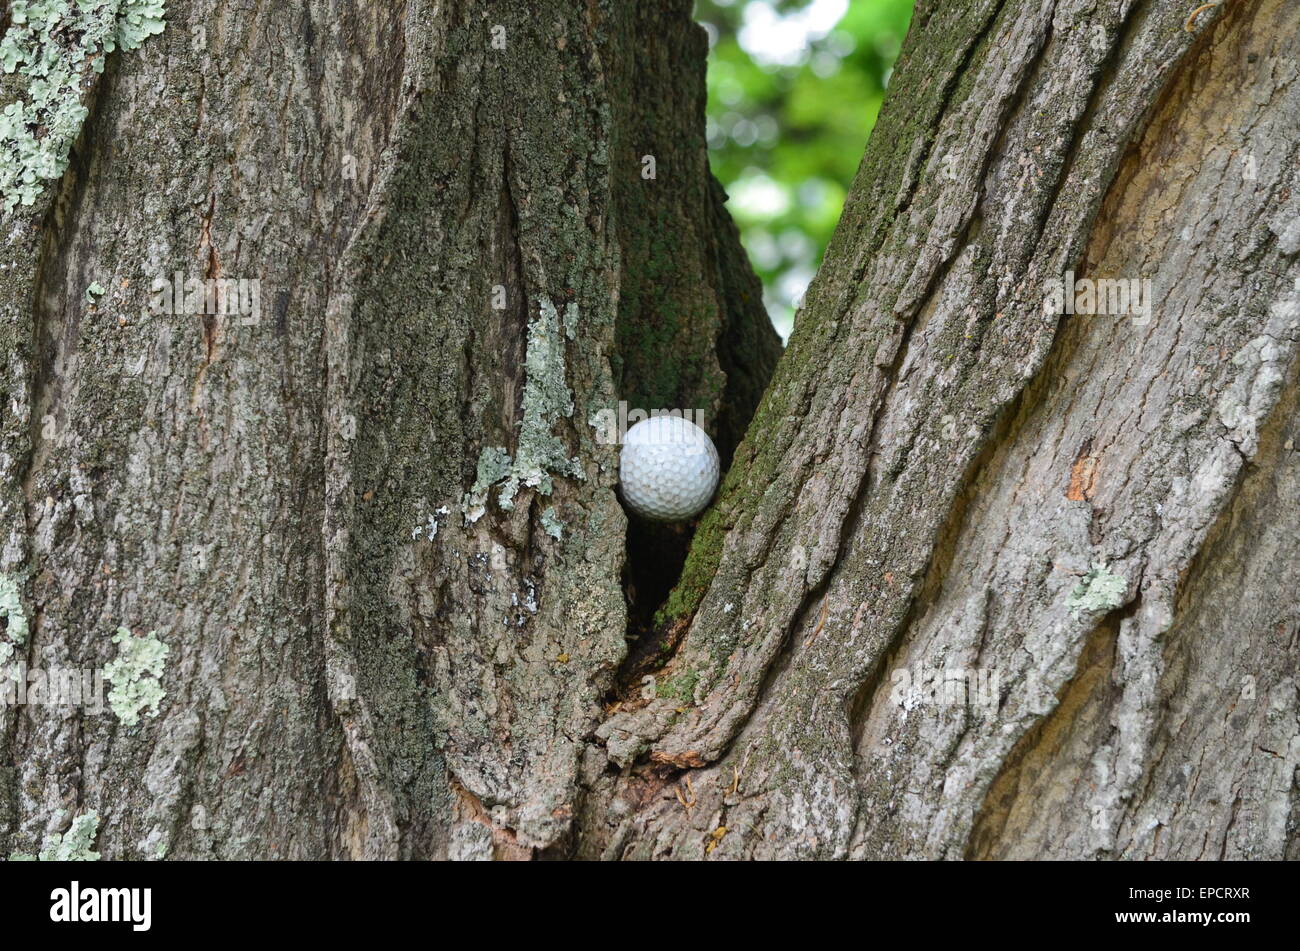 Golf ball in a tree Stock Photo - Alamy